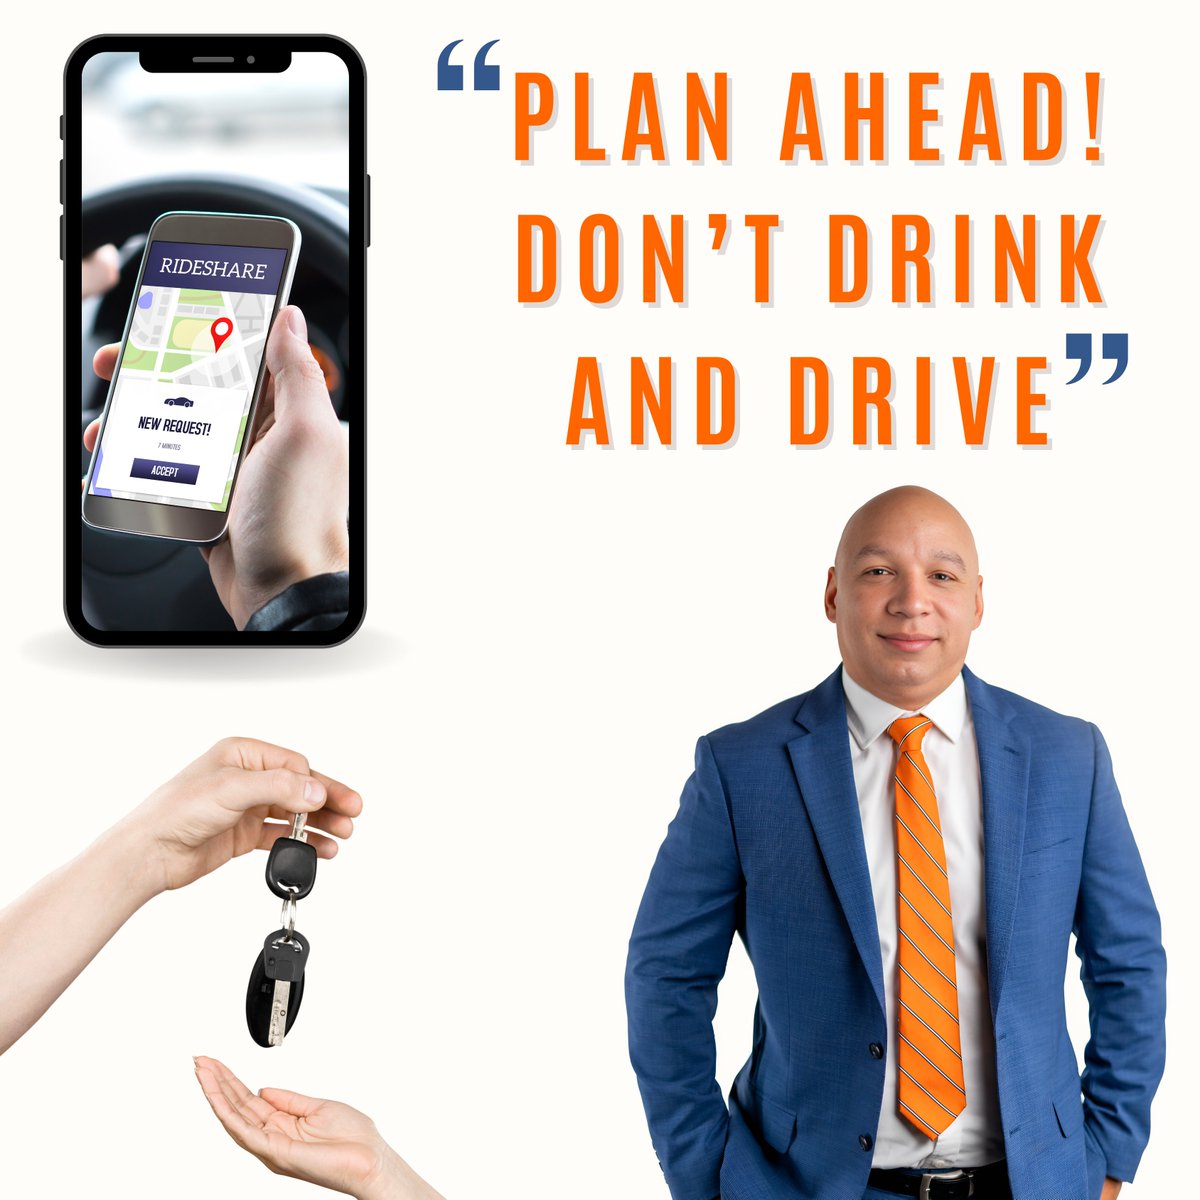 Raise your glasses responsibly this Cinco de Mayo! 🍹 Whether it’s ordering an Uber or having a designated driver, let’s celebrate safely and ensure everyone gets home safely. 
…
#lawyerthelawyer #cincodemayo #drunkdrivers #soberdriver #designateddriver